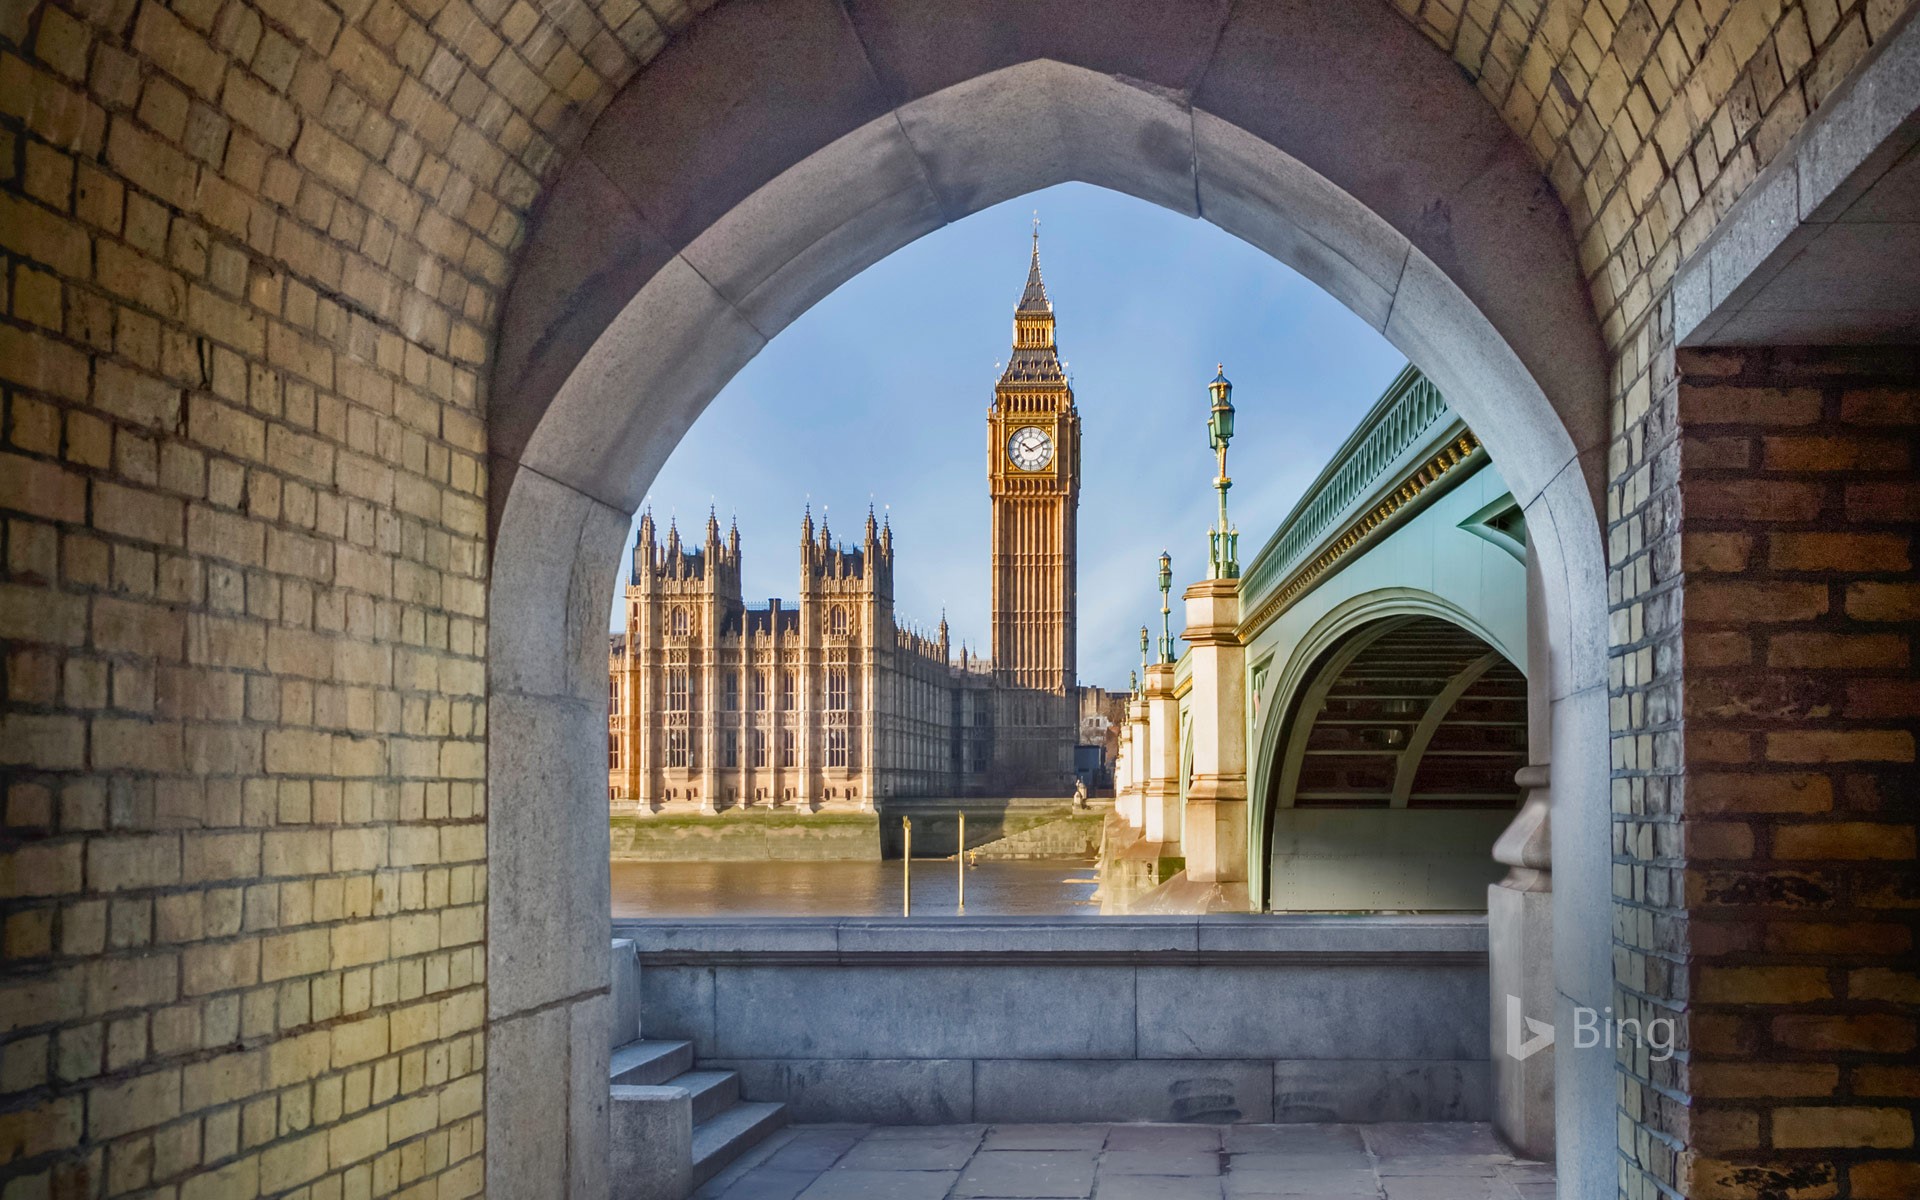 View of Big Ben and the Palace of Westminster through a pedestrian tunnel, London, England